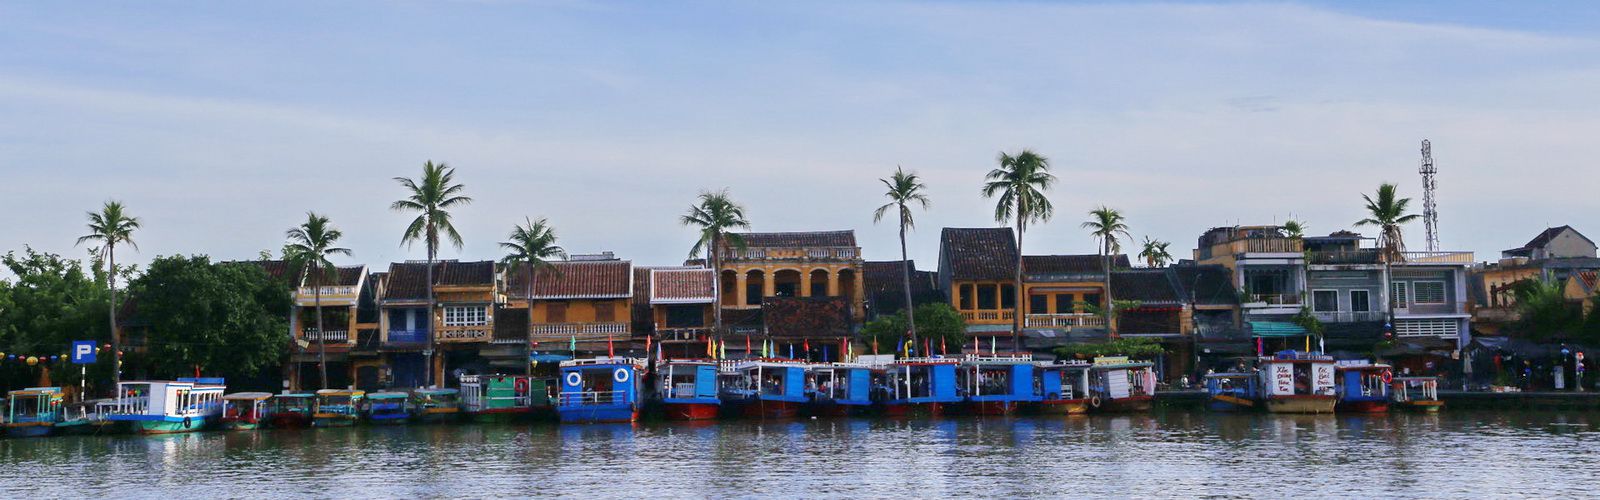 Places To Go in Siem Reap